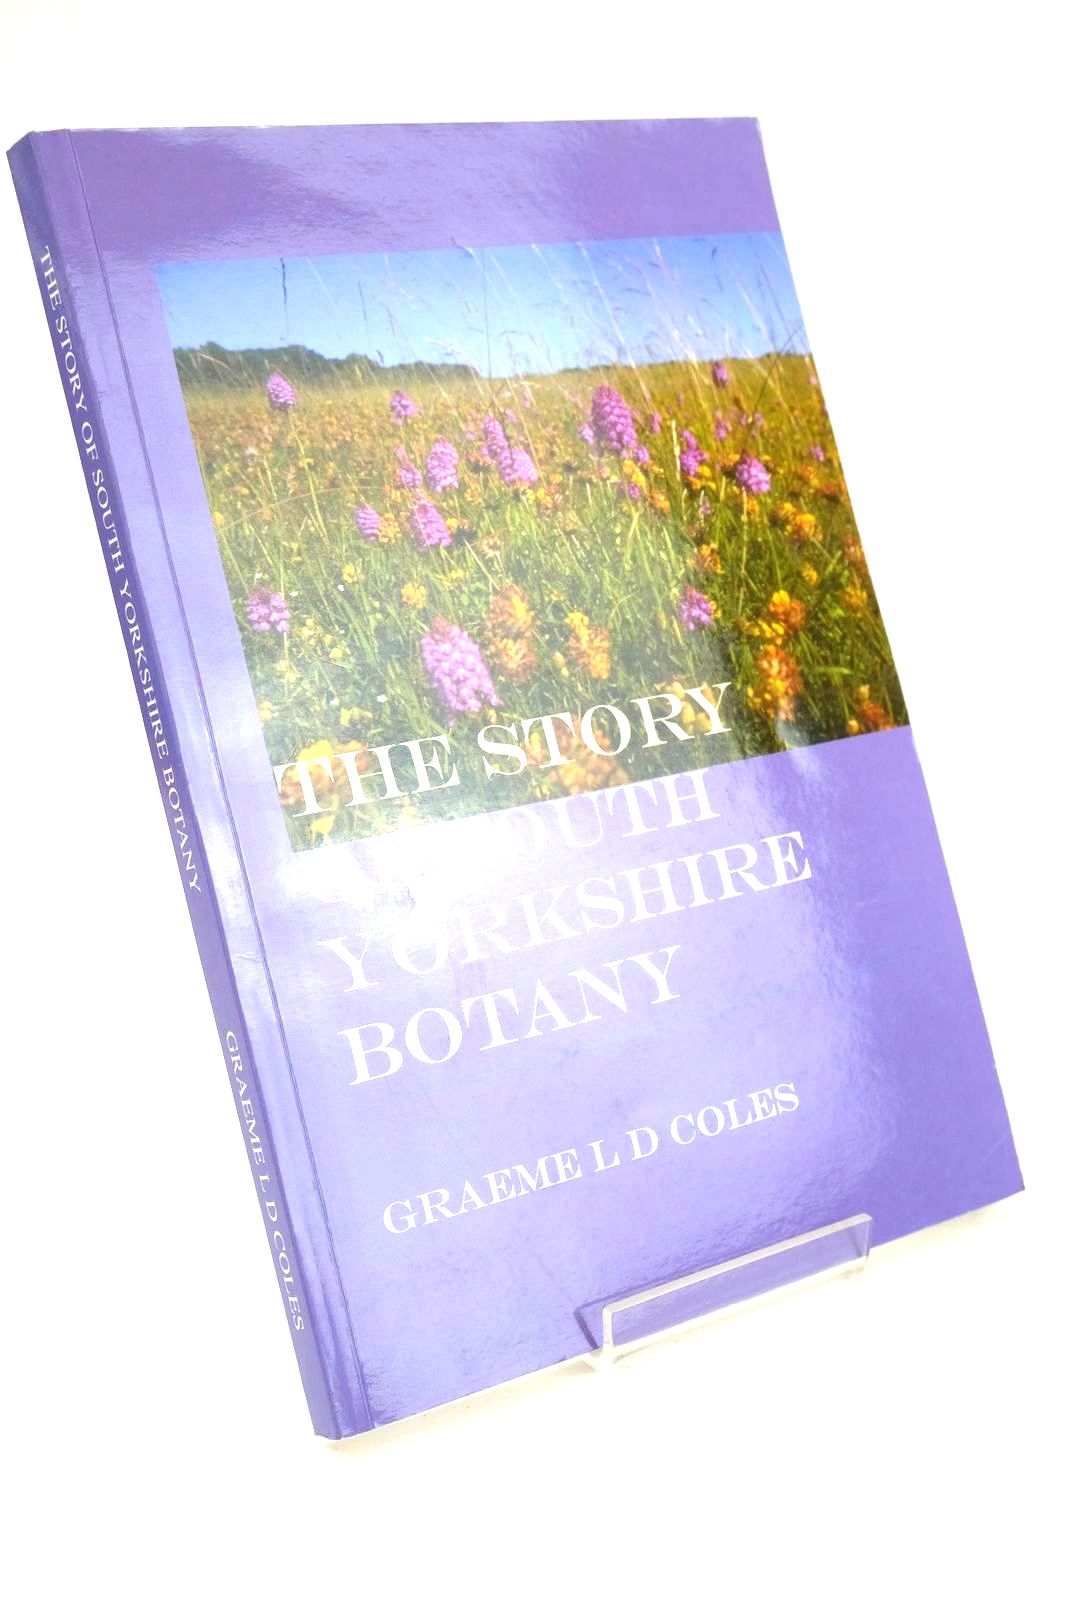 Photo of THE STORY OF SOUTH YORKSHIRE BOTANY- Stock Number: 1324184